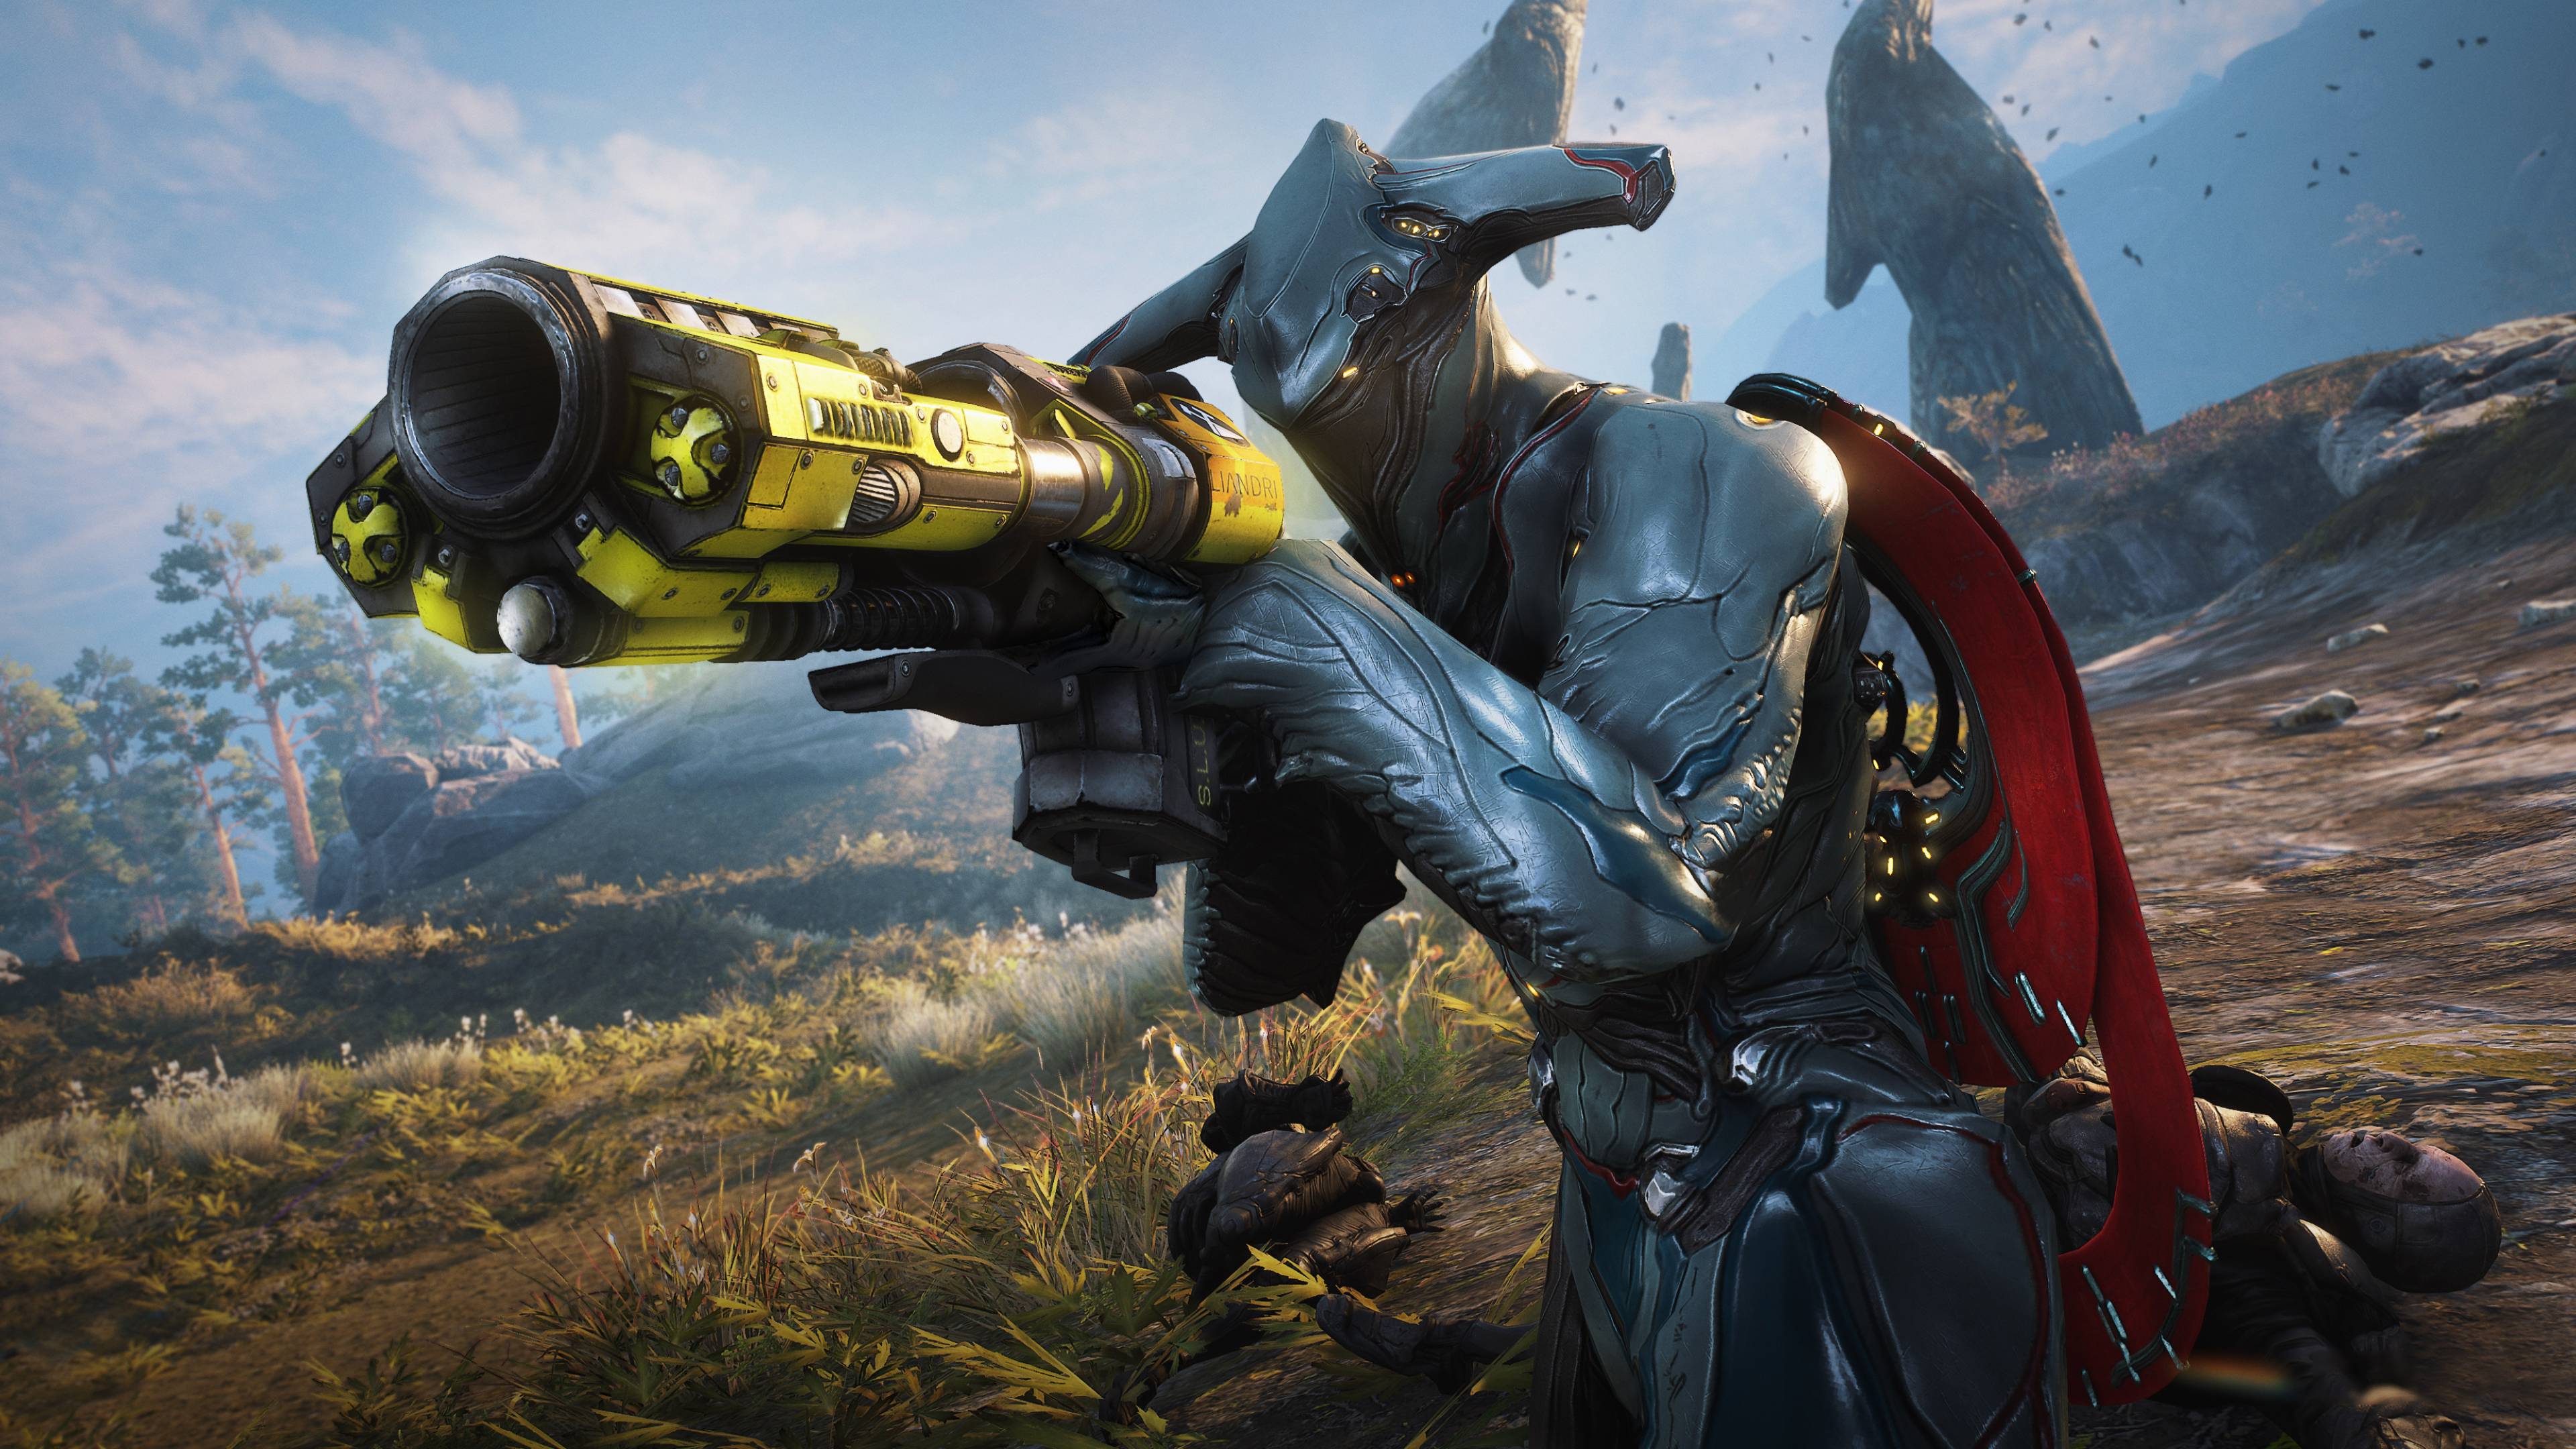 Play Warframe now on the Epic Games Store